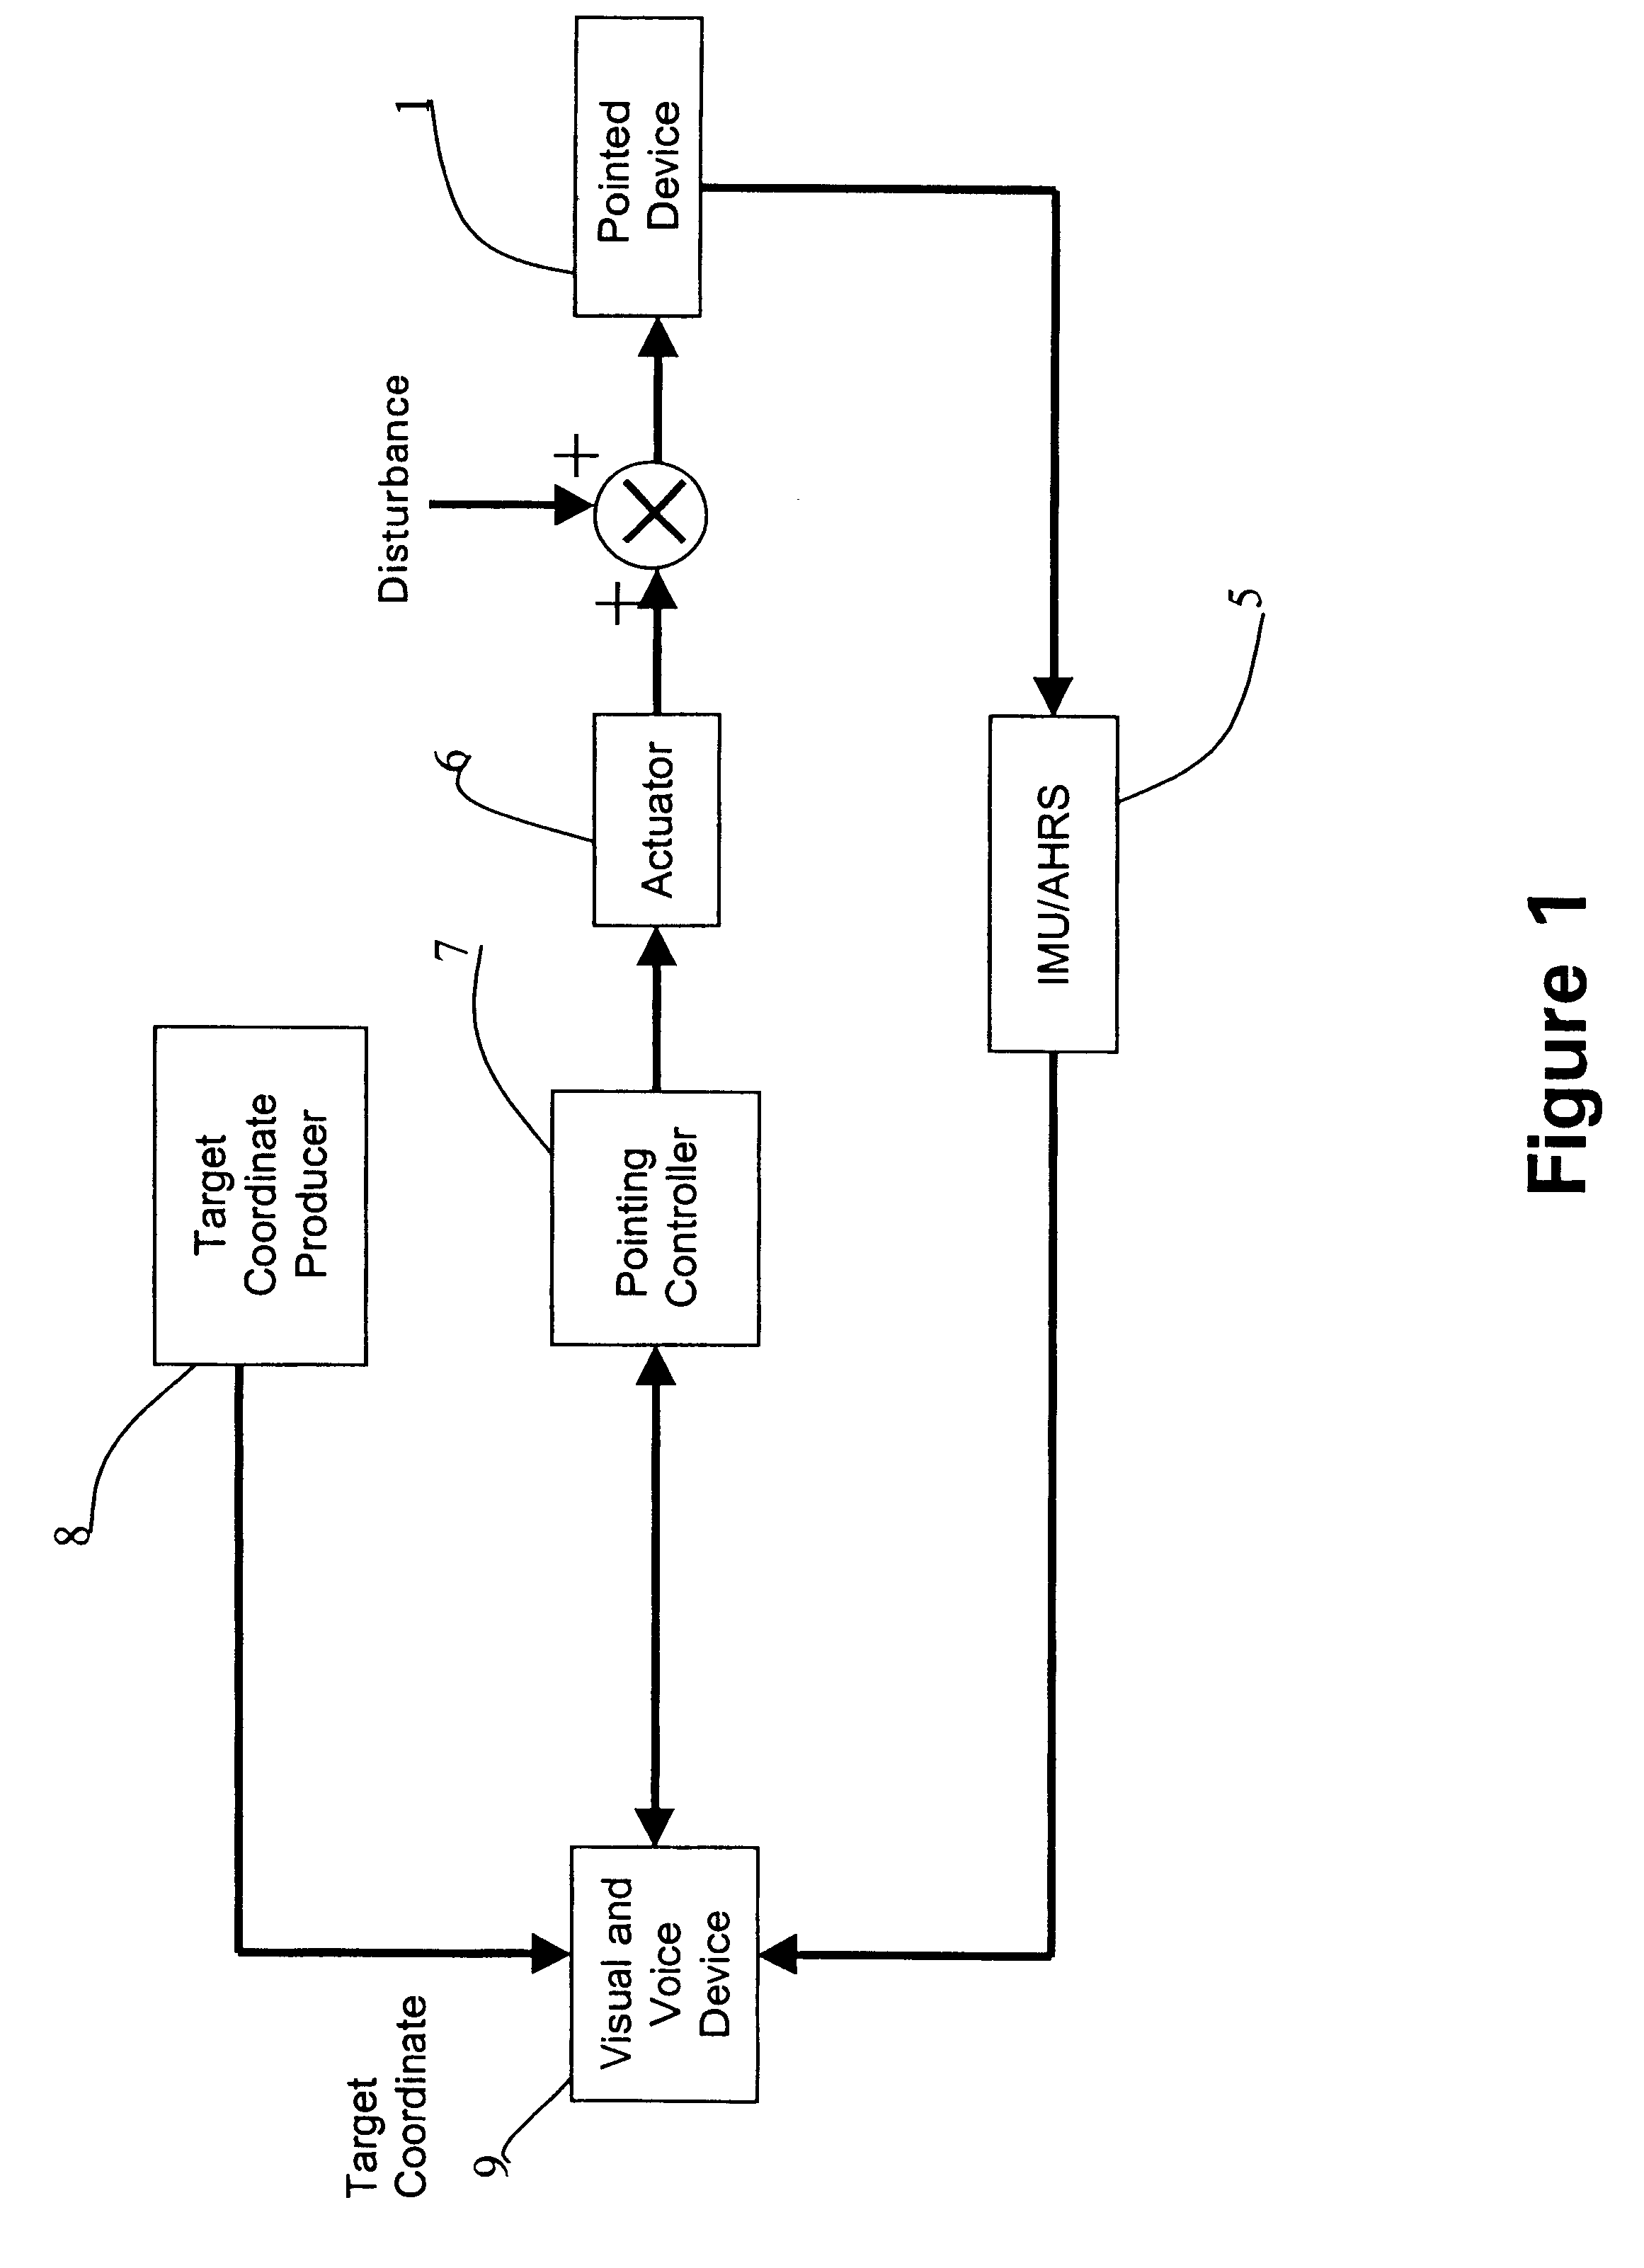 Method and system for pointing and stabilizing a device